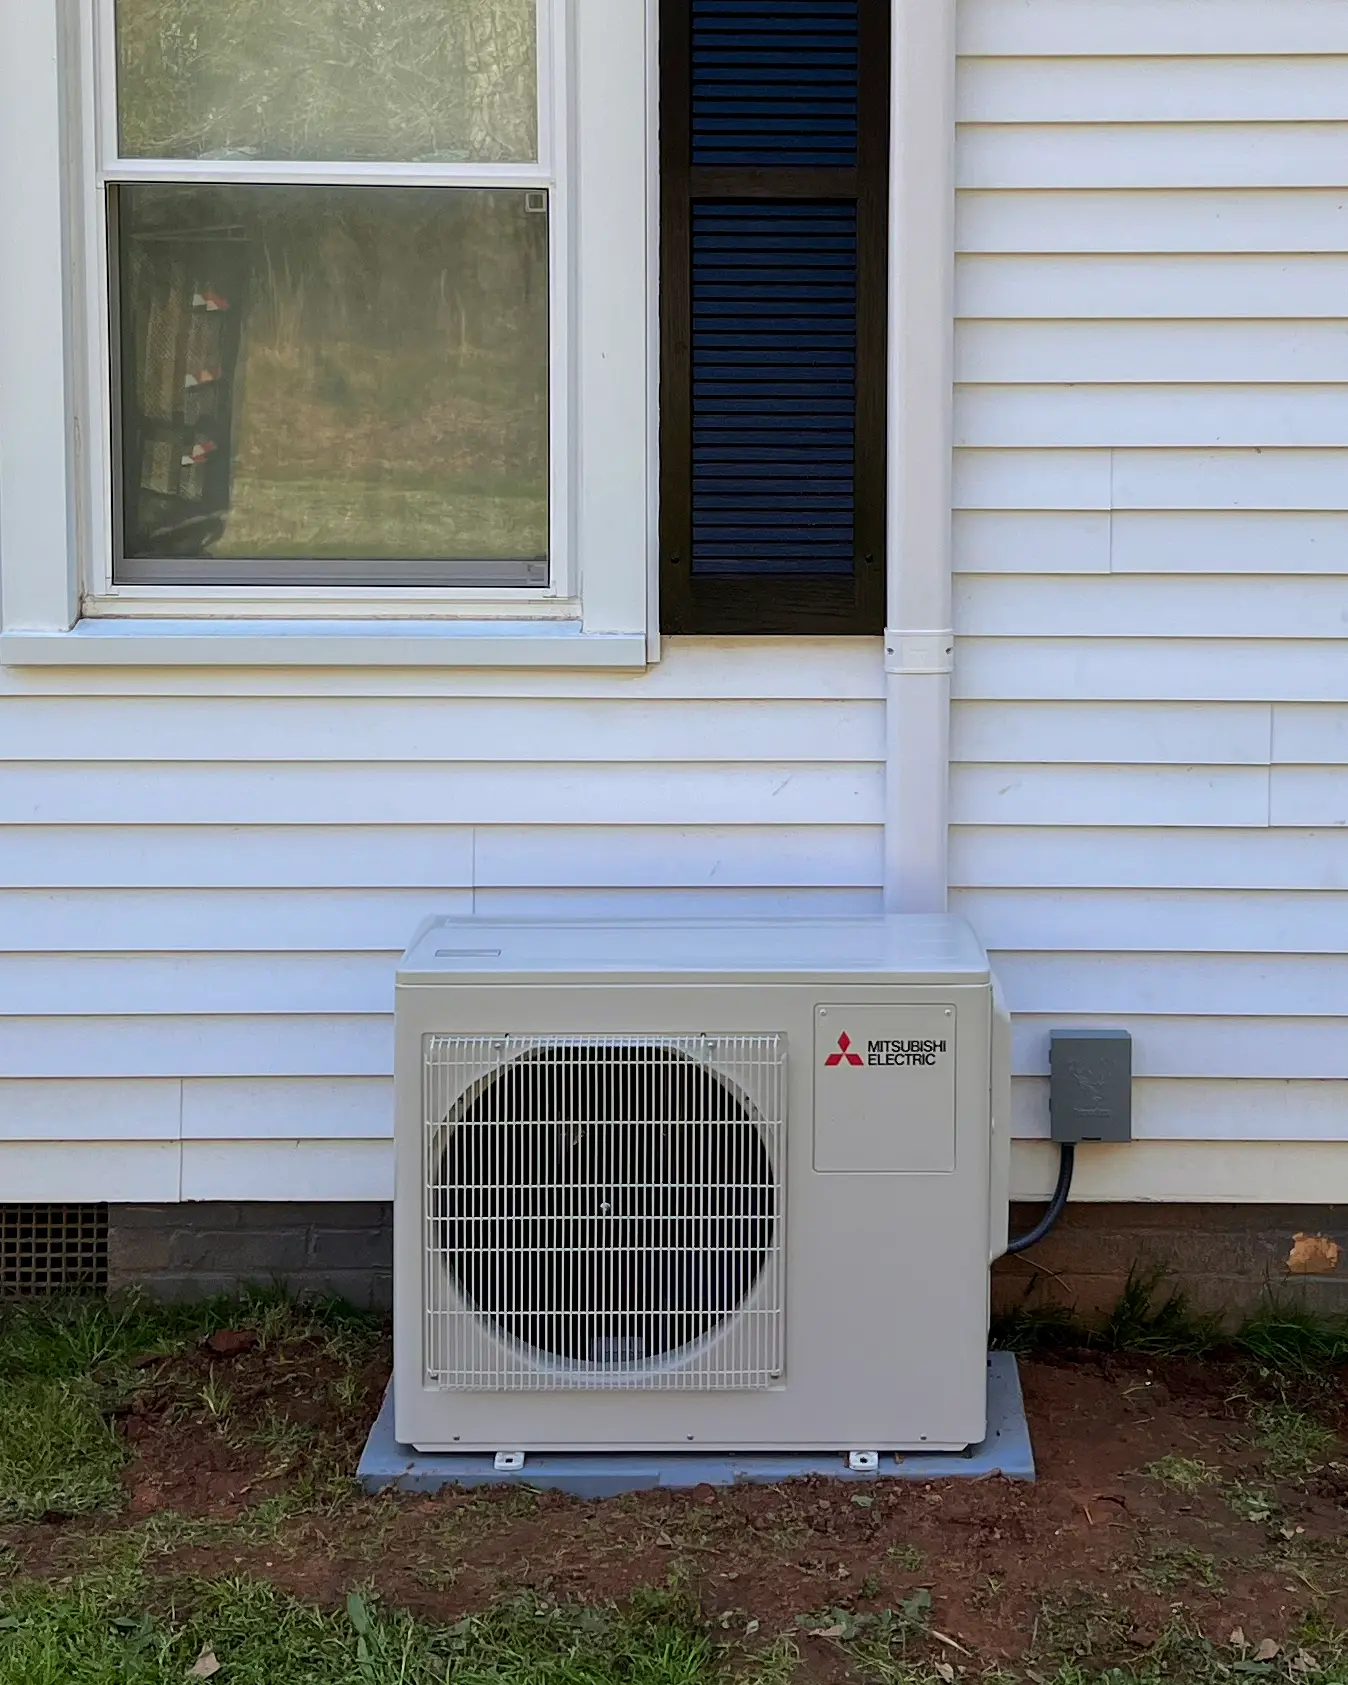 Mitsubishi mini-split heating and cooling unit - HVAC system - outside of residential home (close up)